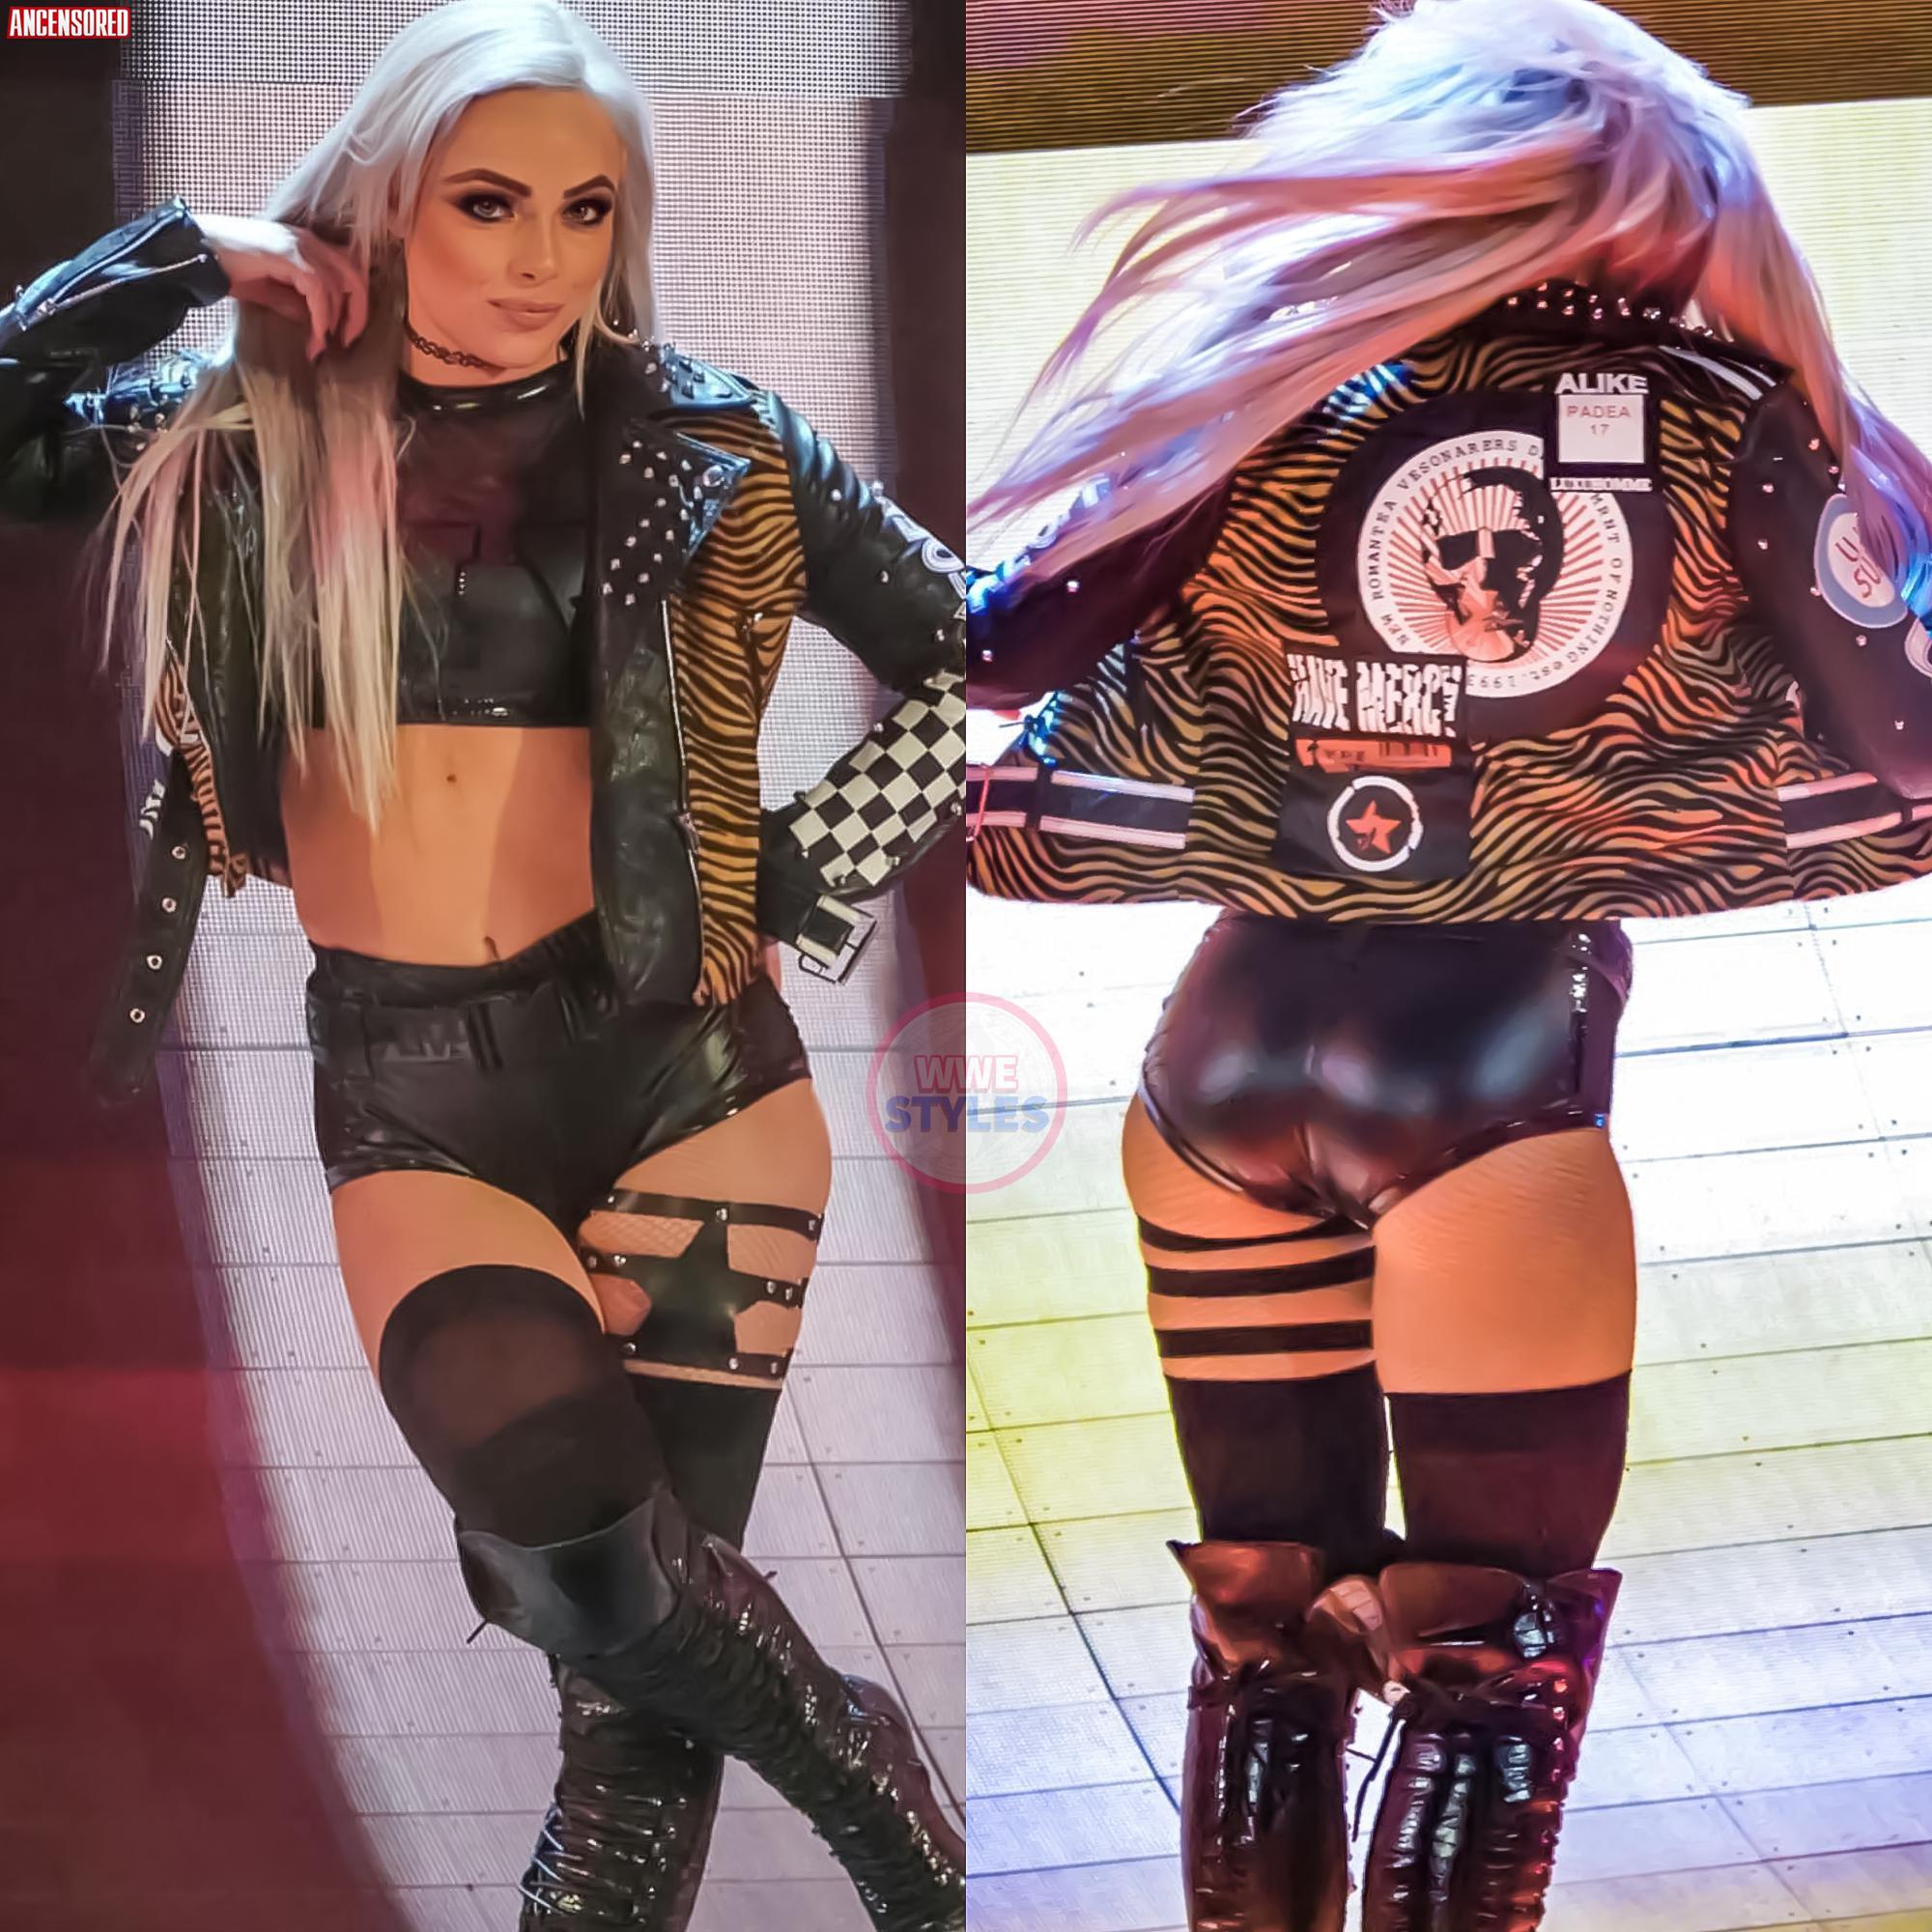 denice martinez recommends liv morgan leaked nudes pic